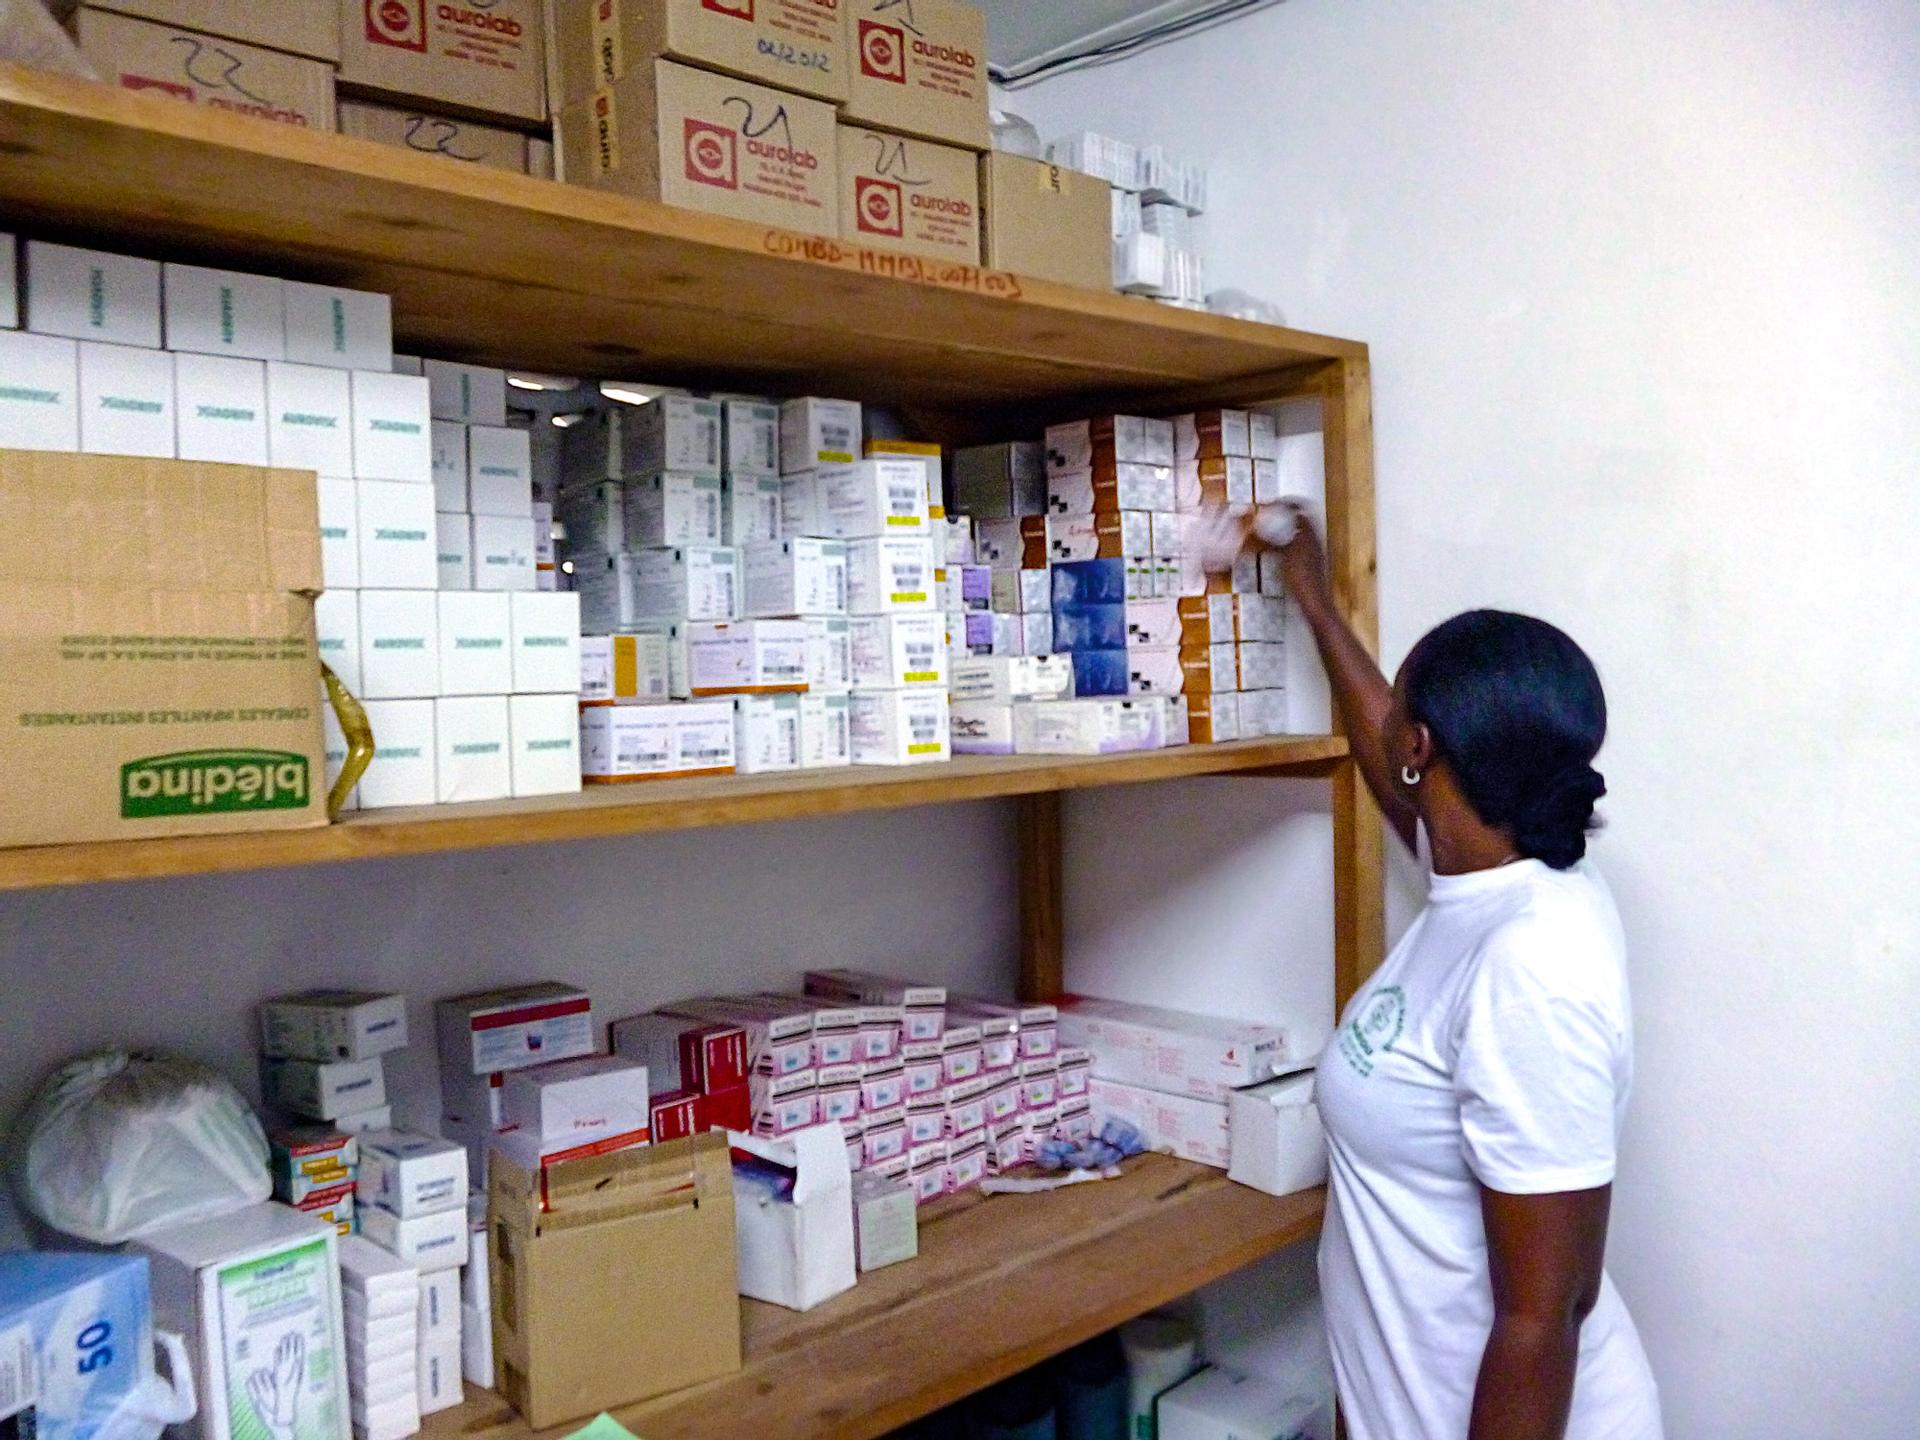 A woman takes a single box of medication from a rack of shelving, full of medicine boxes.